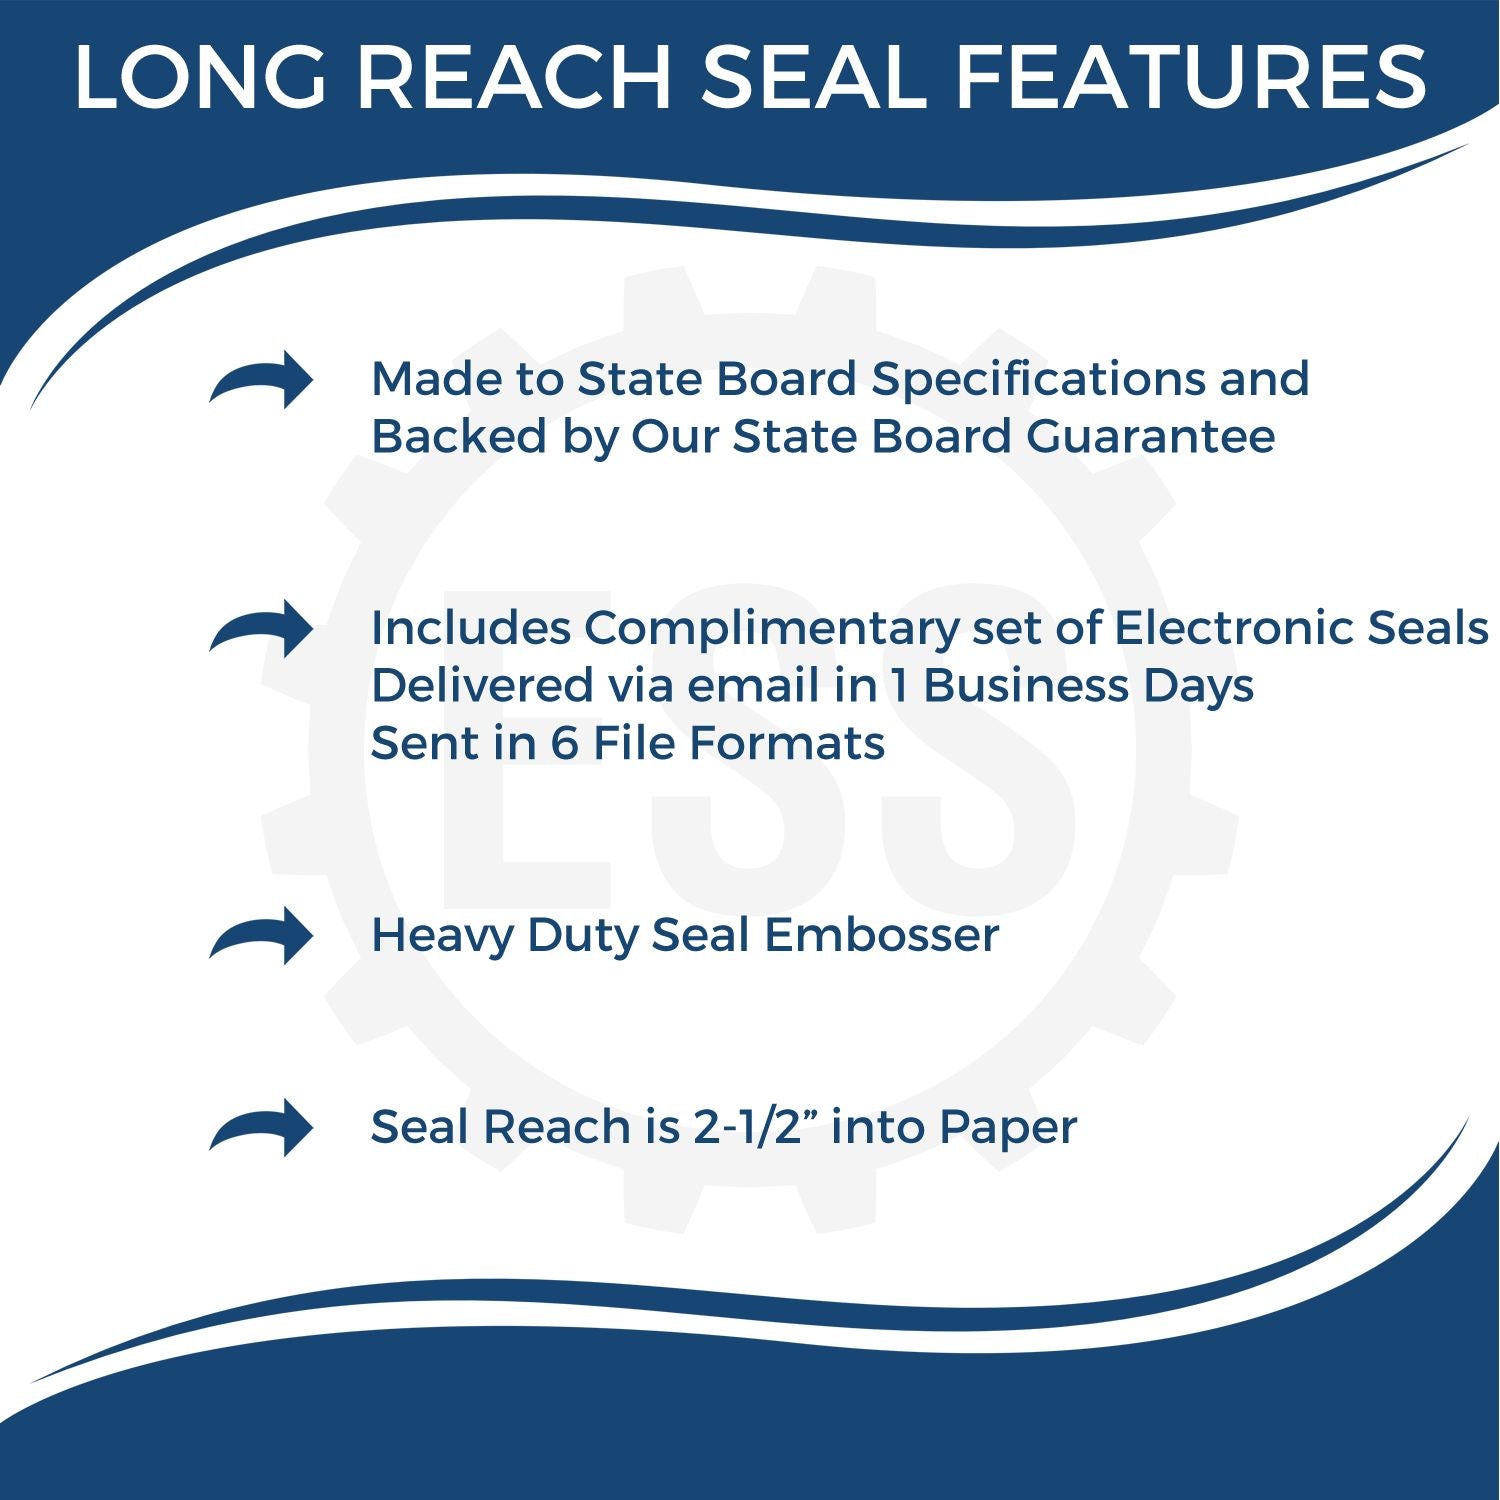 The main image for the Long Reach North Dakota PE Seal depicting a sample of the imprint and electronic files